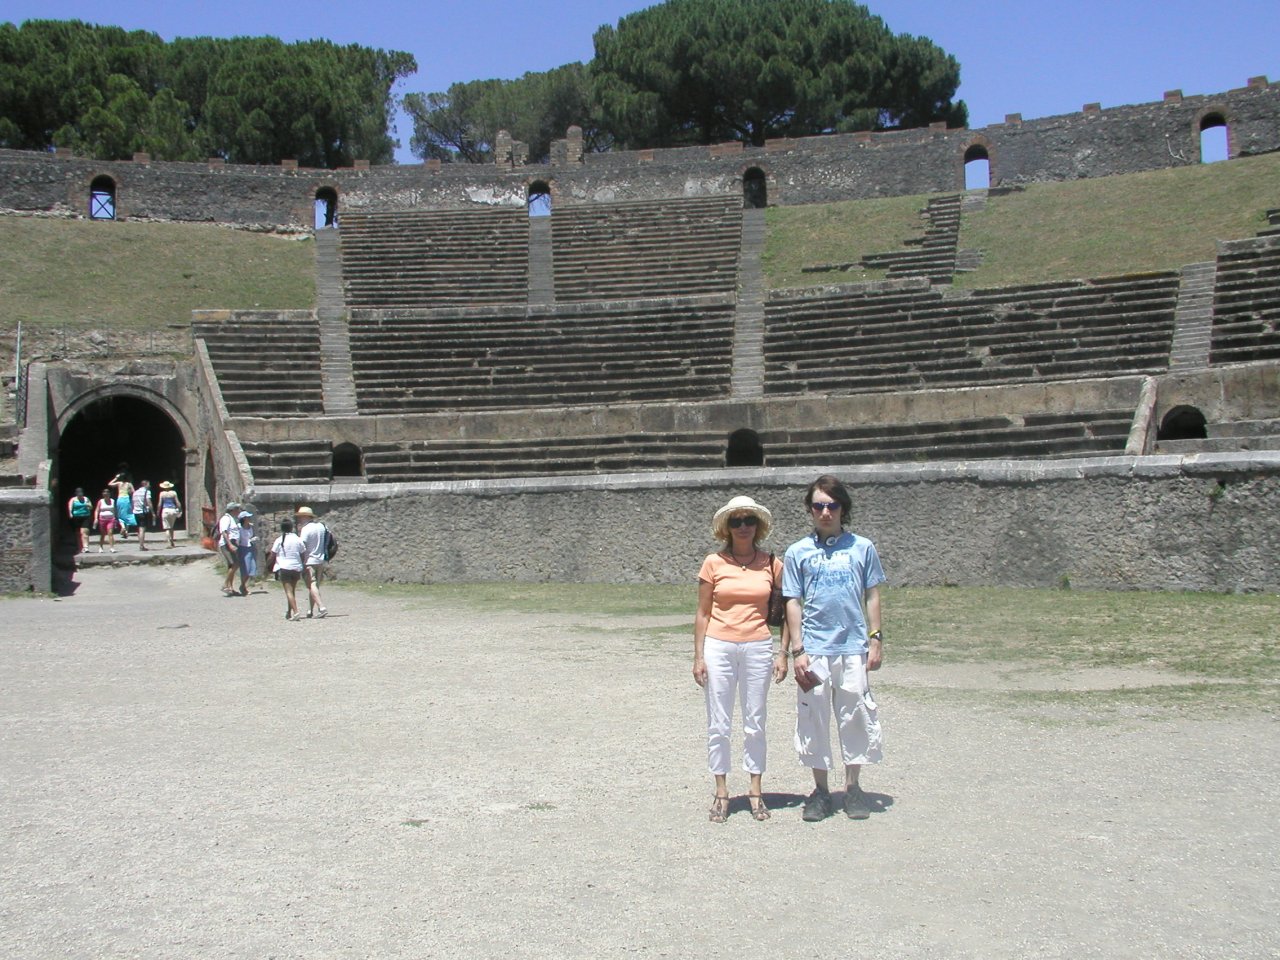 JPEG image - Pompei : inside the arena used for gladiatorial fights, chariot racing, etc. ...